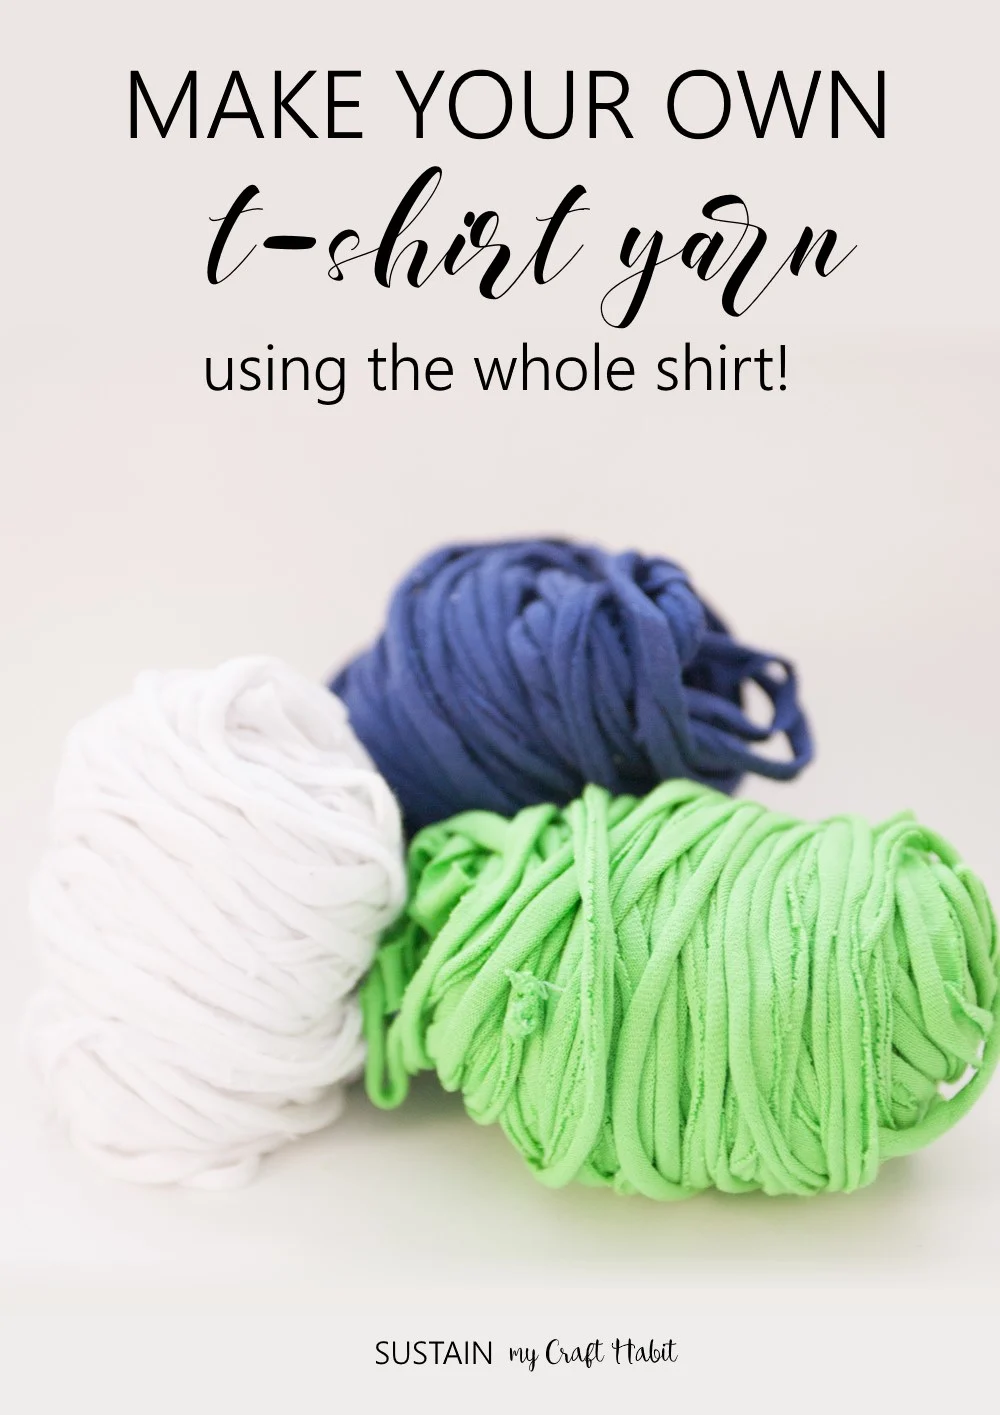 Make your own t-shirt yarn using the whole shirt! Check out the detailed pictorial to use up an entire t-shirt including the sleeves. SUSTAIN MY CRAFT HABIT